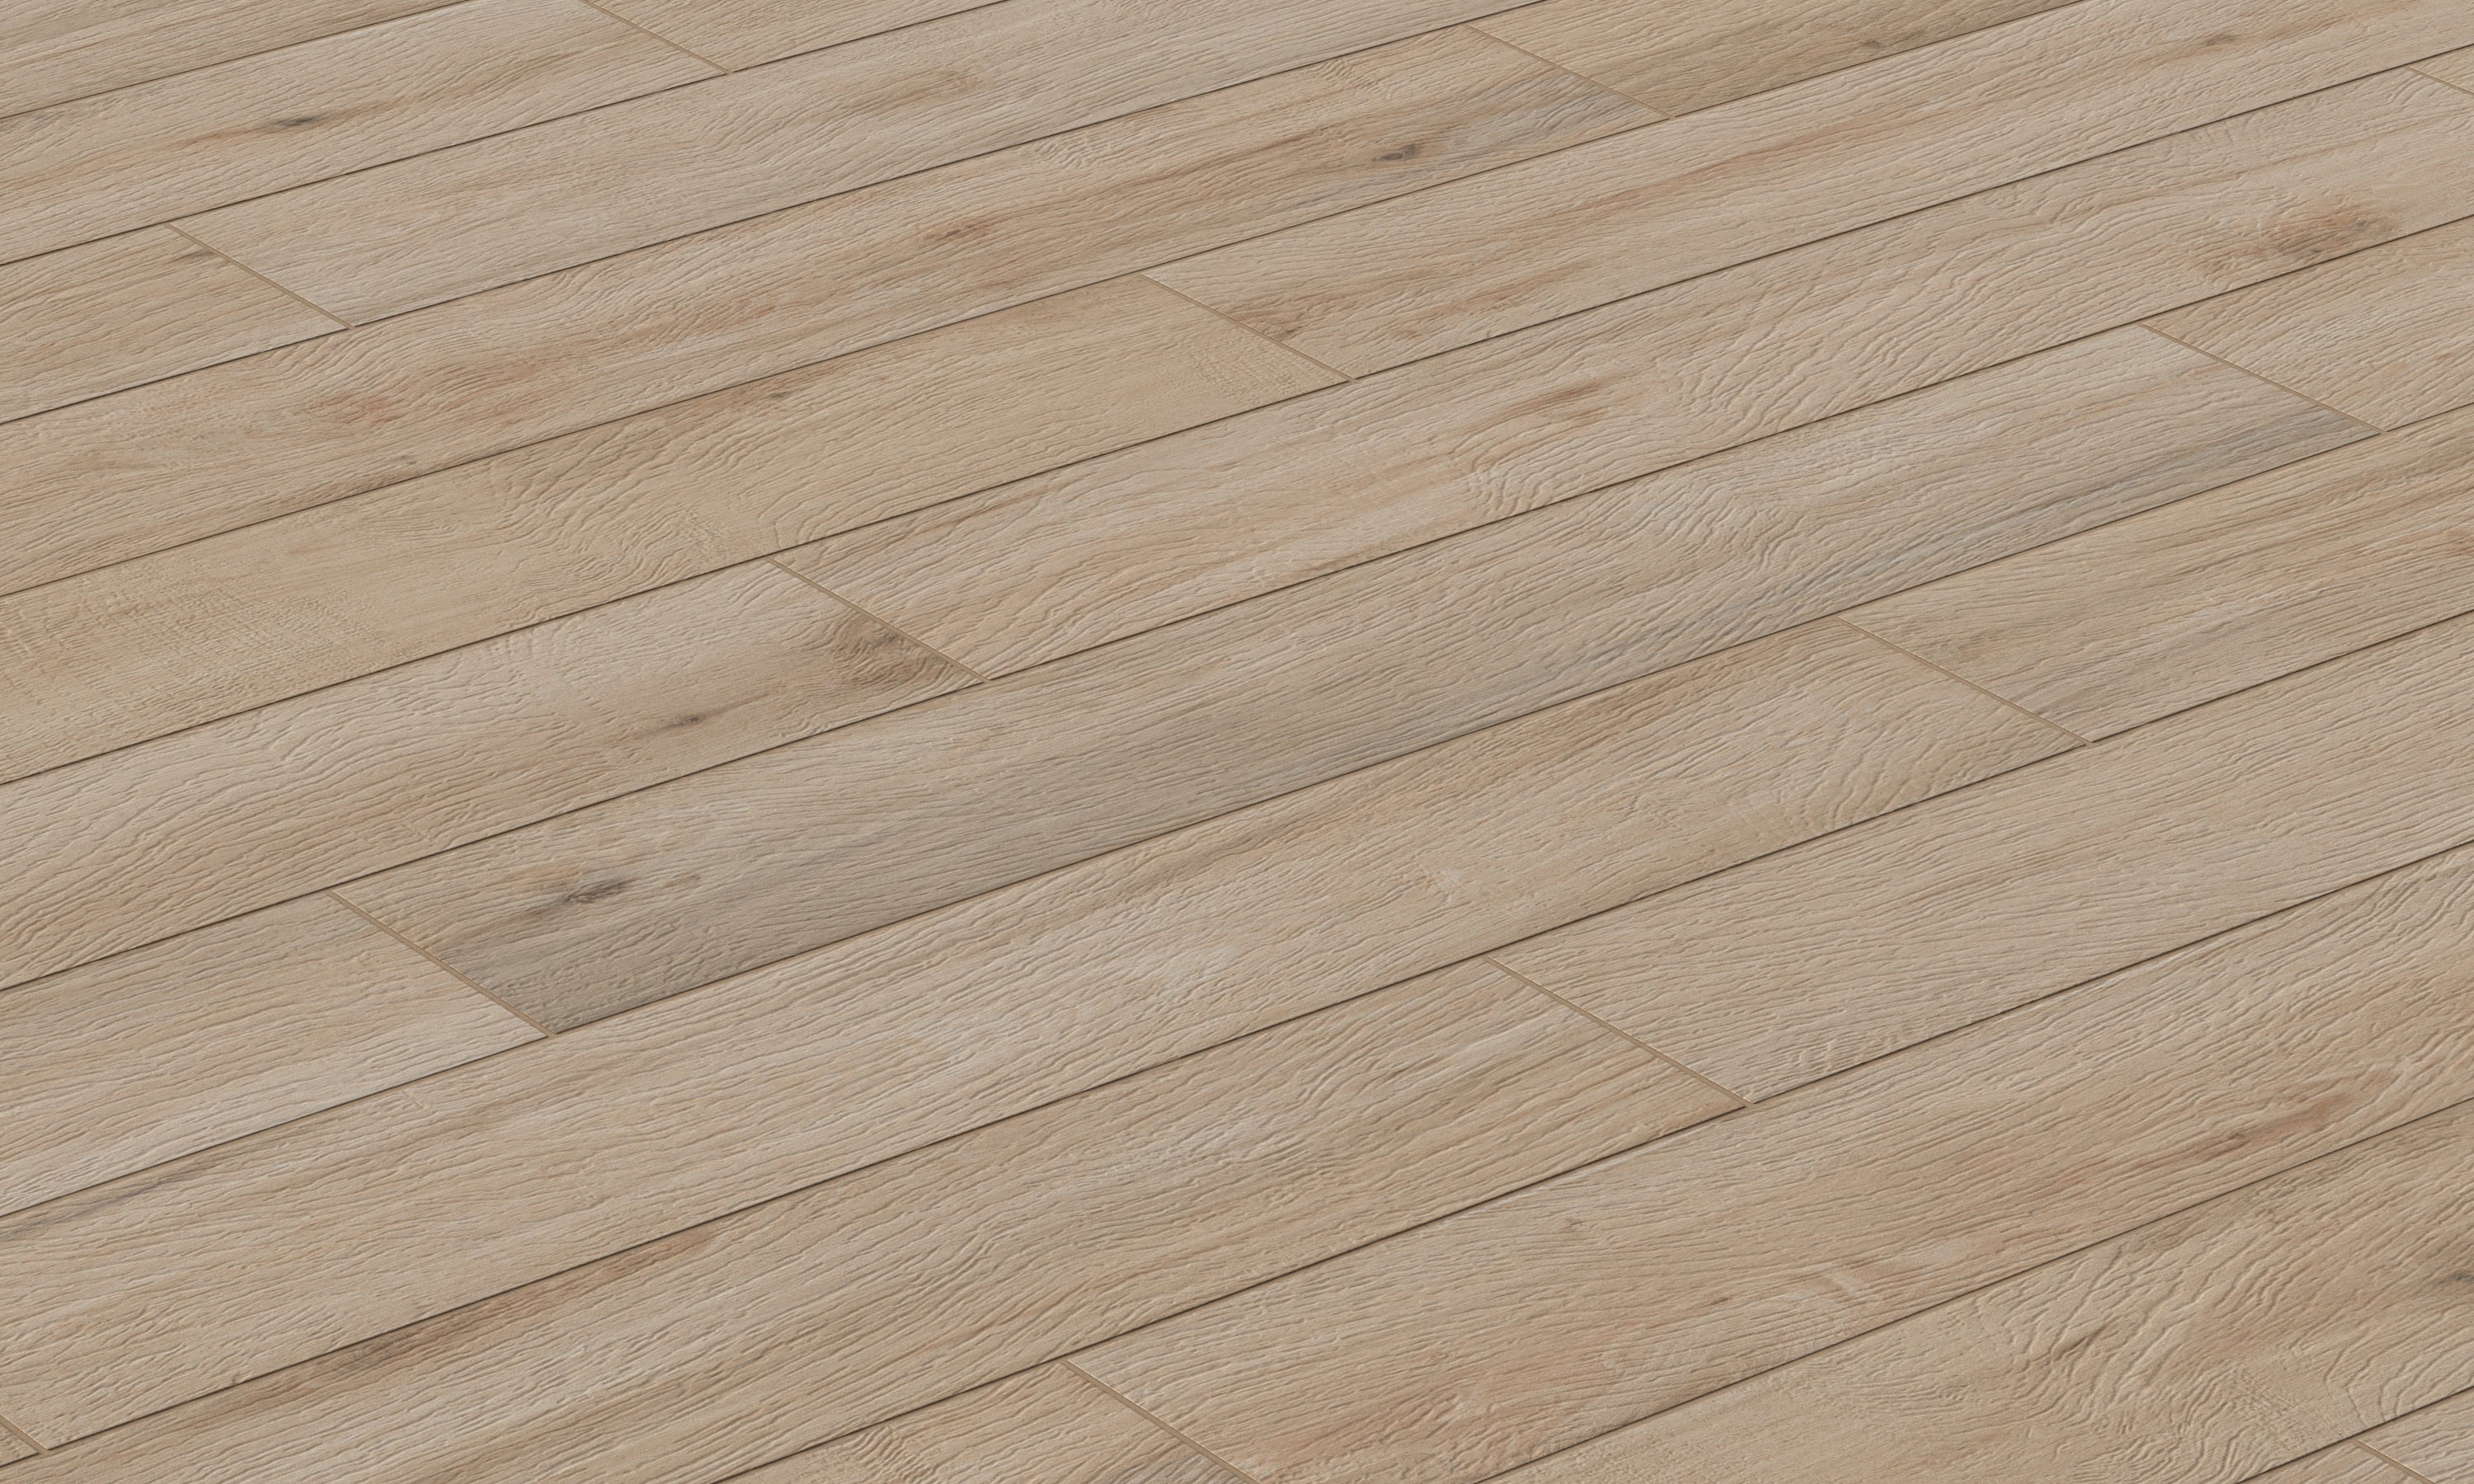 Preston 8x48 porcelain plank tile in Birch, highlighting intricate wood detailing and realism. Experience its texture and nuances up close with our AR feature.